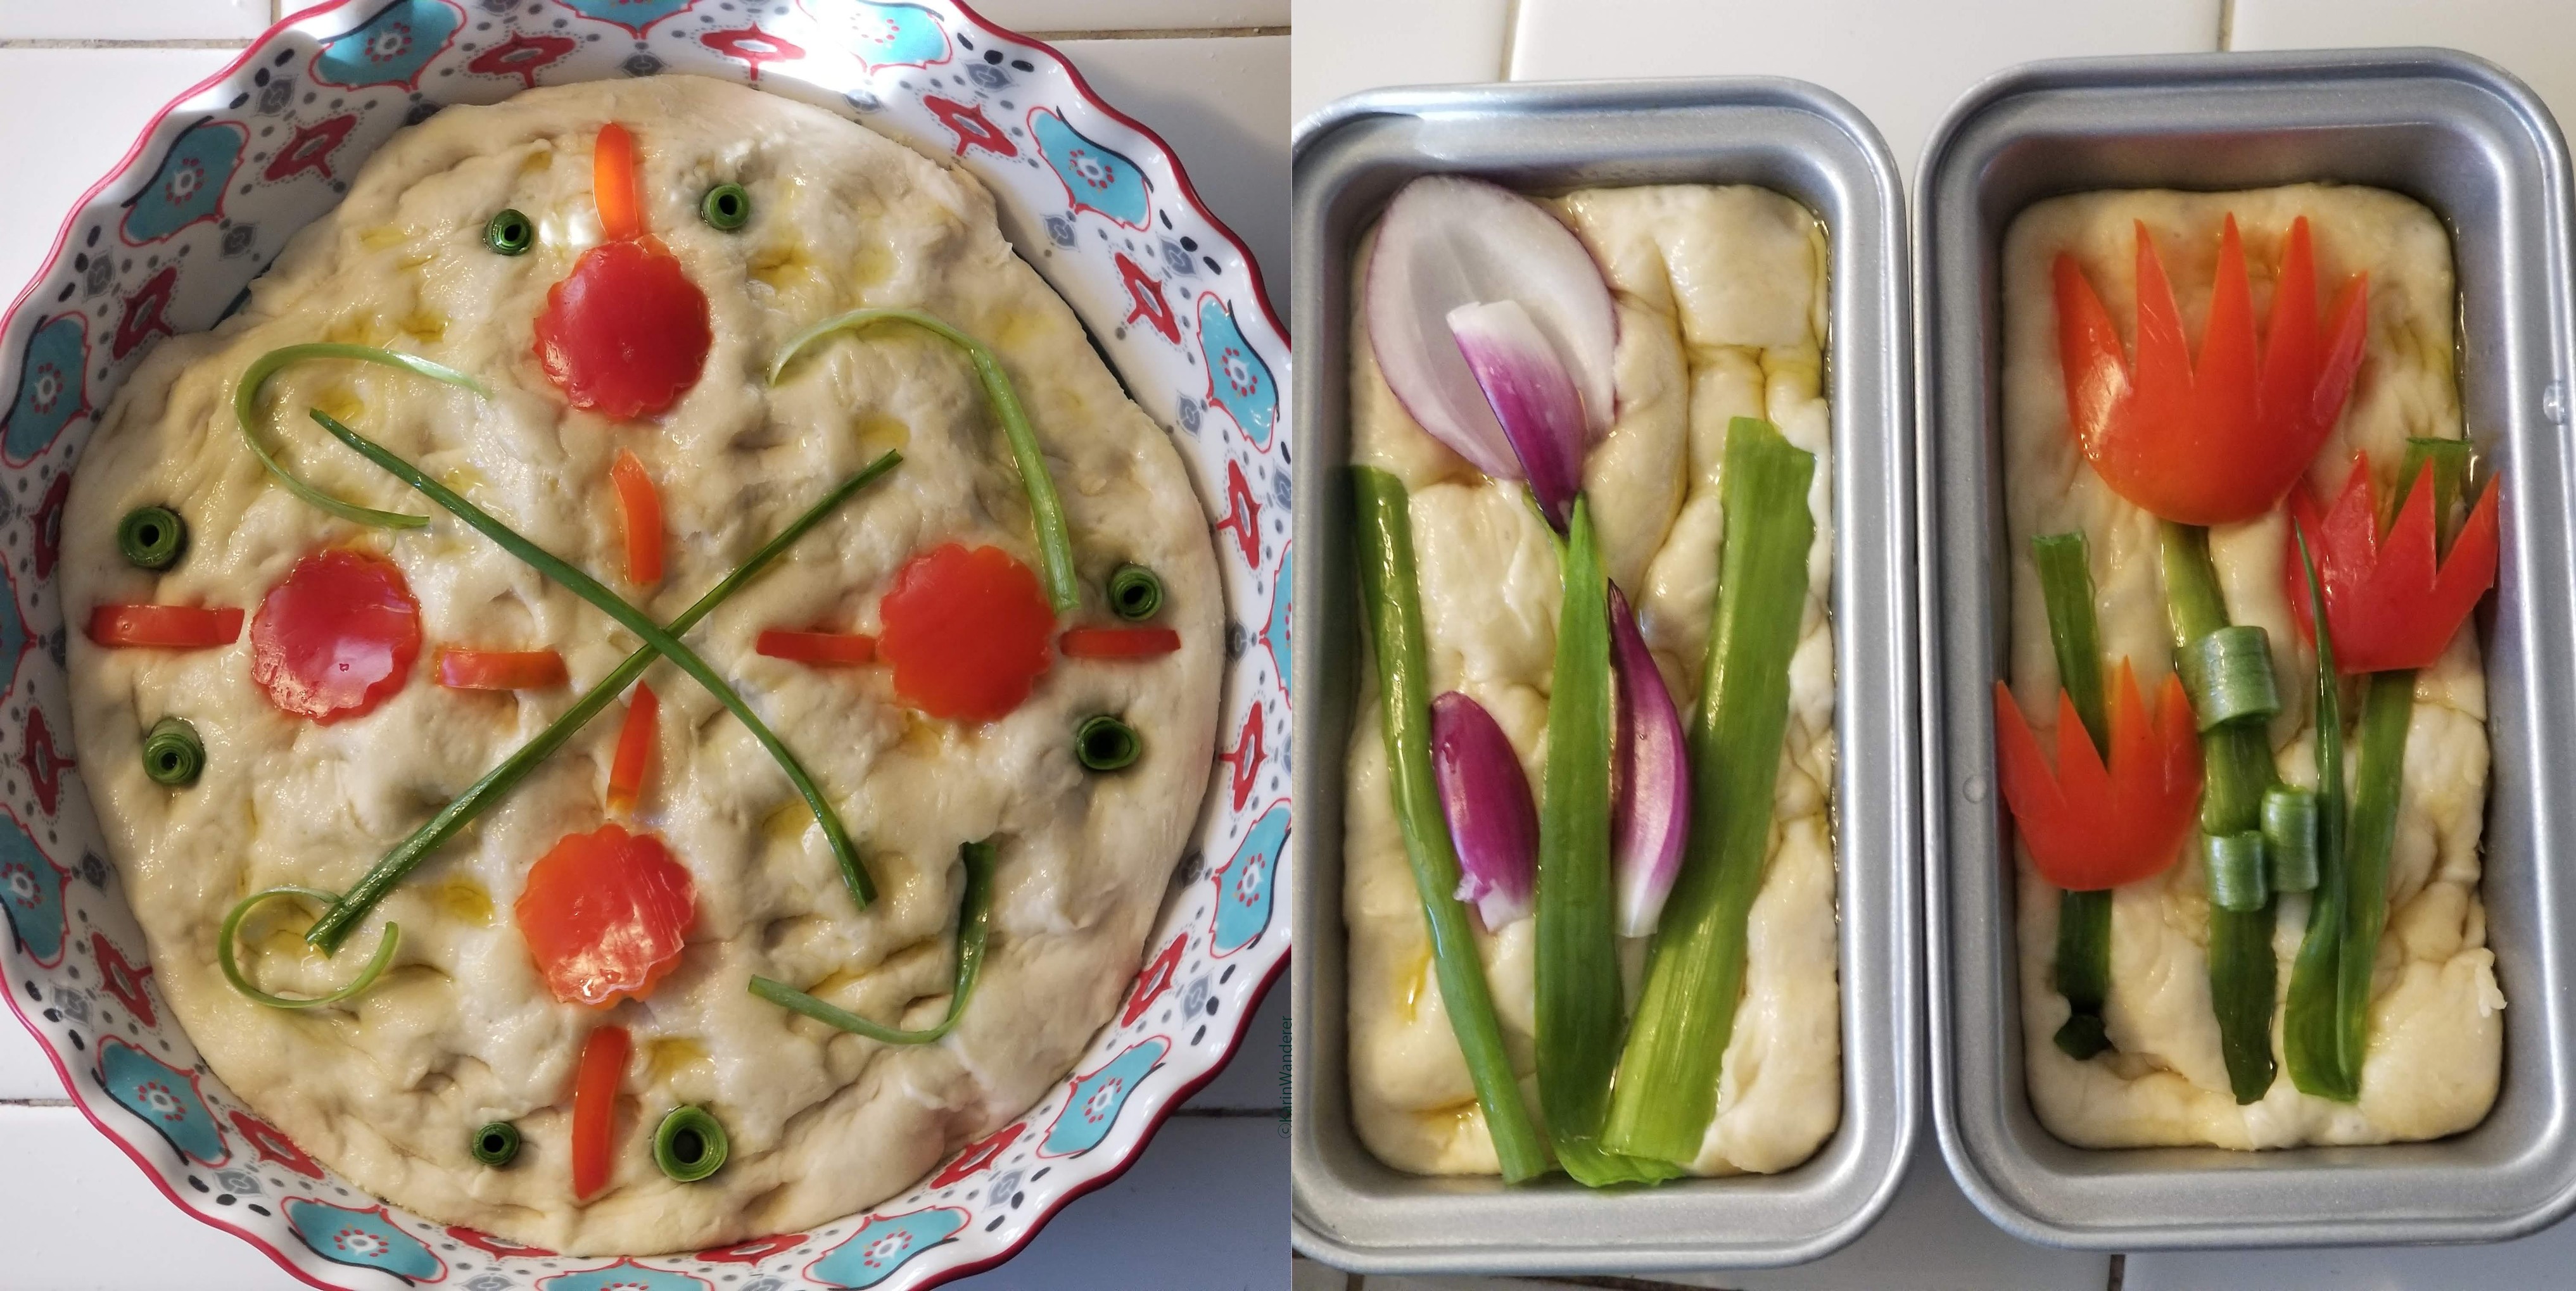 Photo of 3 loaves of focaccia decorated with raw vegetables, about to go into the oven. Loaf 1: circular loaf with a simple mandala made from green onions & red peppers. Loaf 2: small rectangular loaf using red & green onions to look like irises. Loaf 3 : small rectangular loaf using red peppers & green onions to look like tulips.